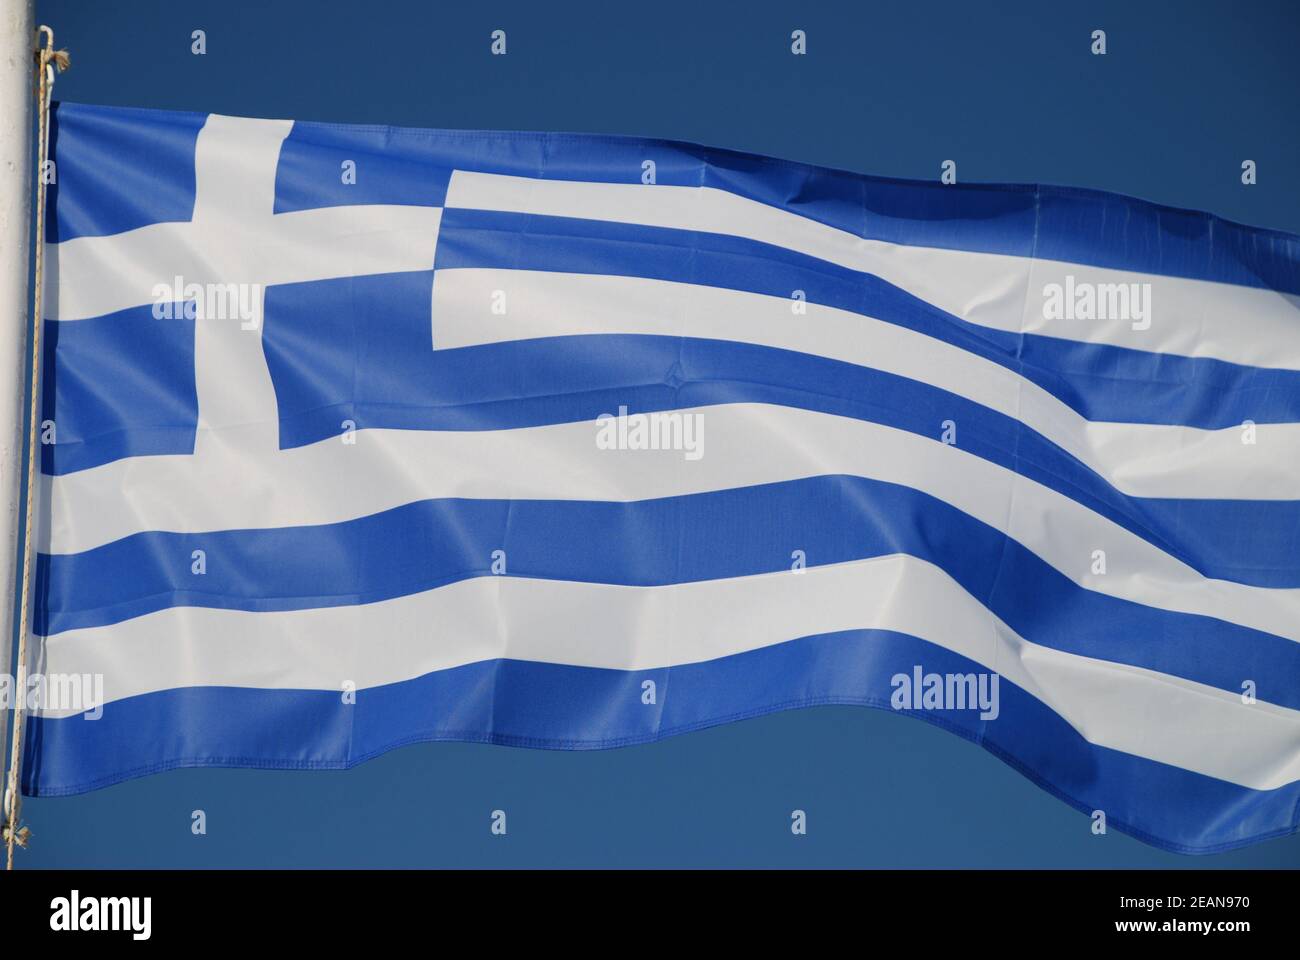 The blue and white flag of the European State of Greece Stock Photo